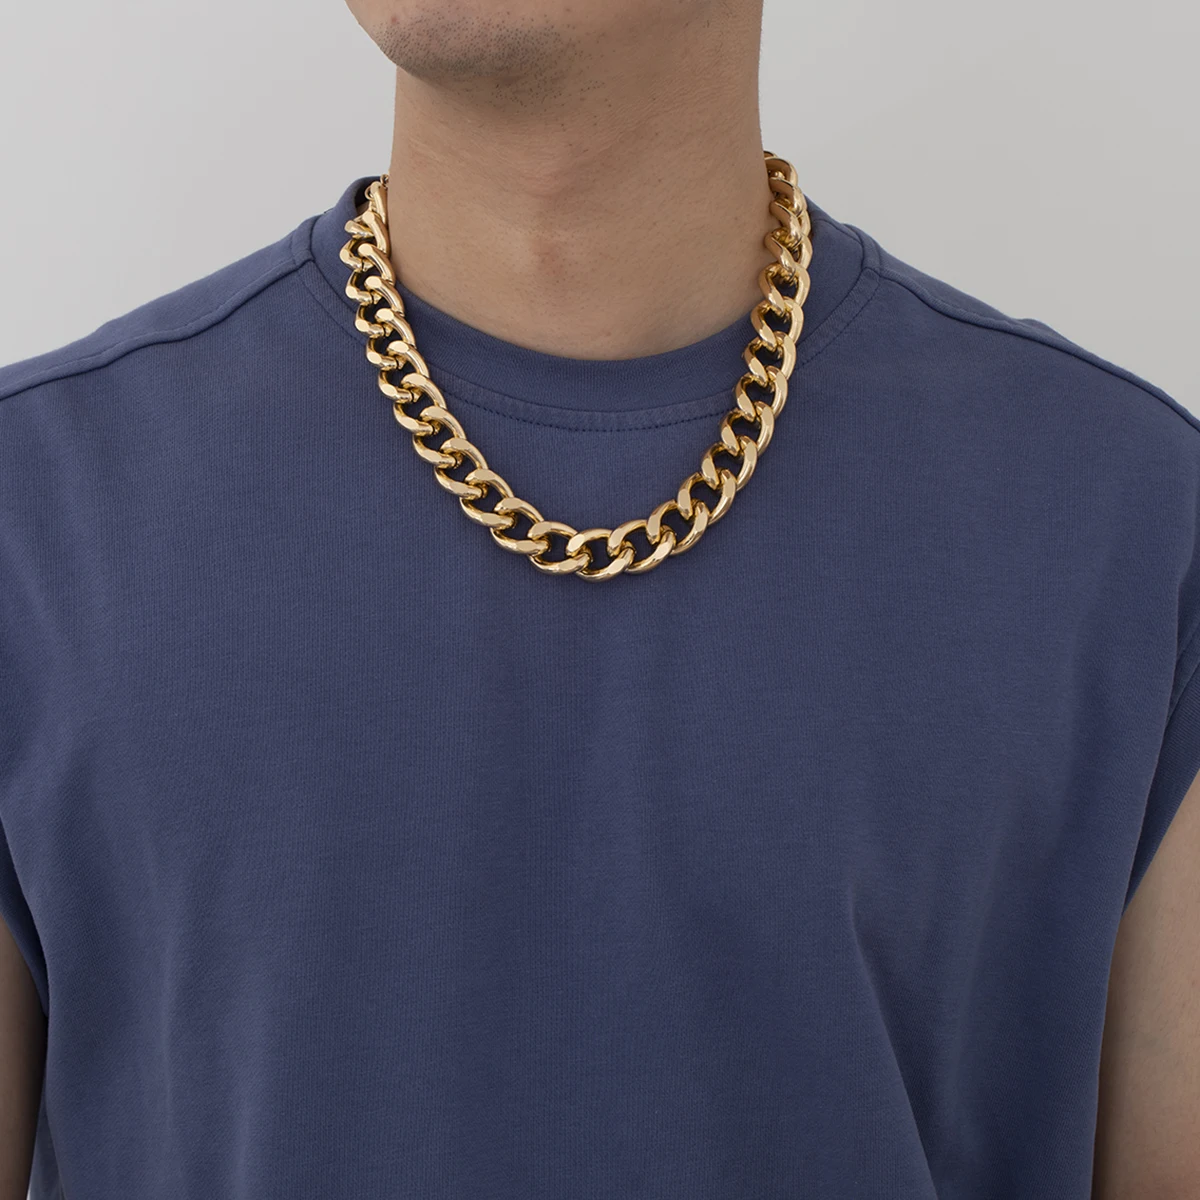 

SHIXIN Hip hop 16inch Wide Gold Filled Jewelry Chain Necklace Cuban Necklace Choker Chunky Cuban Link Necklace for Men Jewelry, Silver,gold